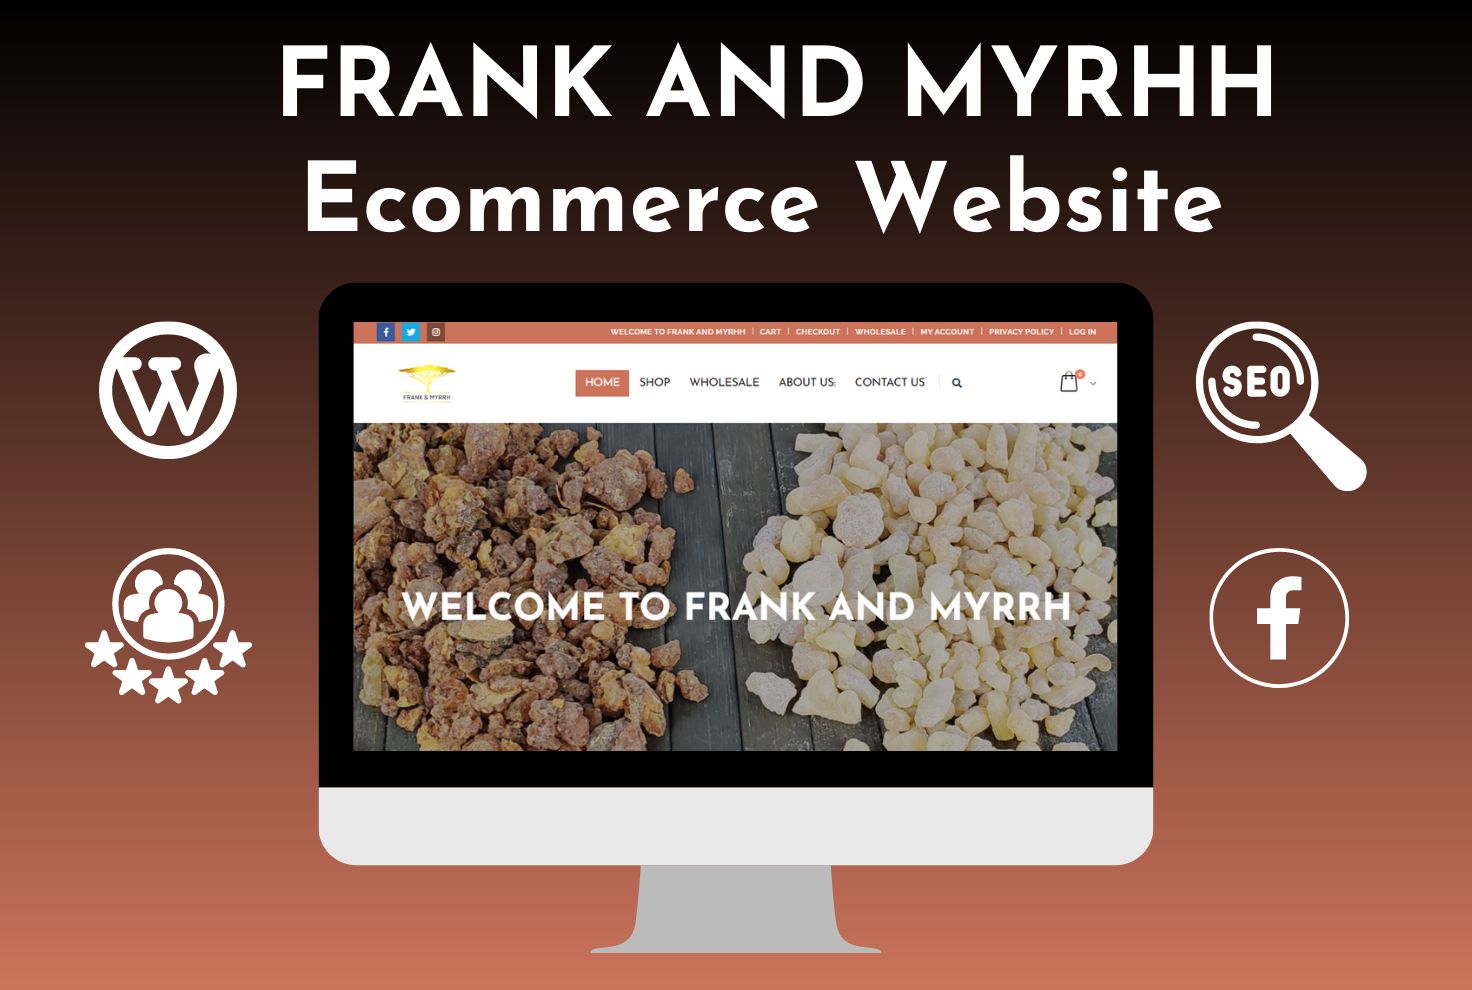 FRANK AND MYRHH Ecommerce website